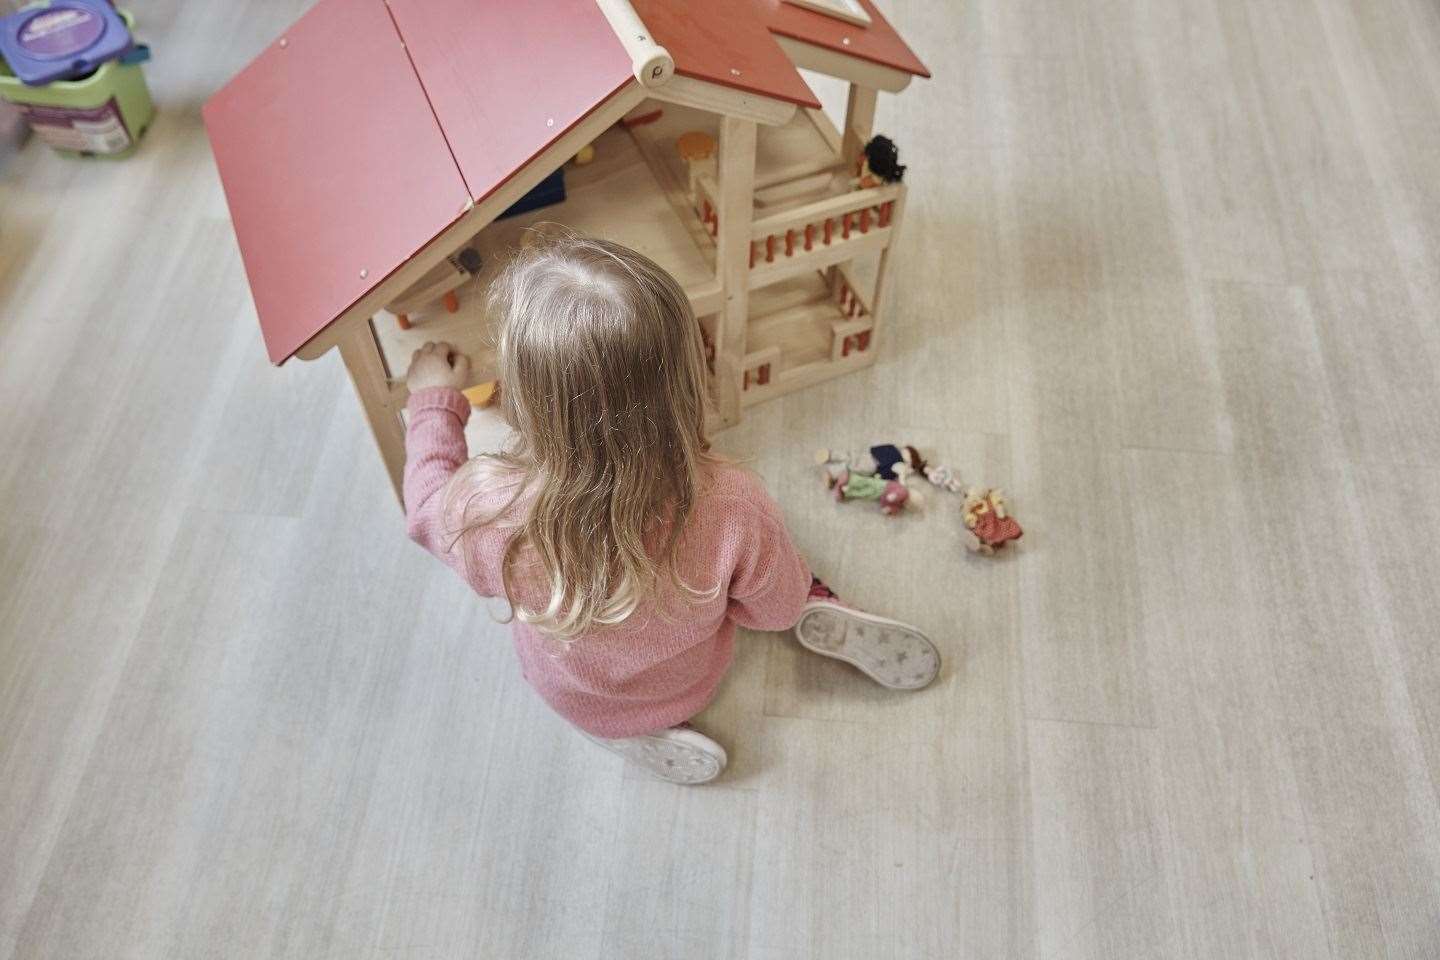 Children have spent a lot of time playing indoors by themselves as a result of lockdowns